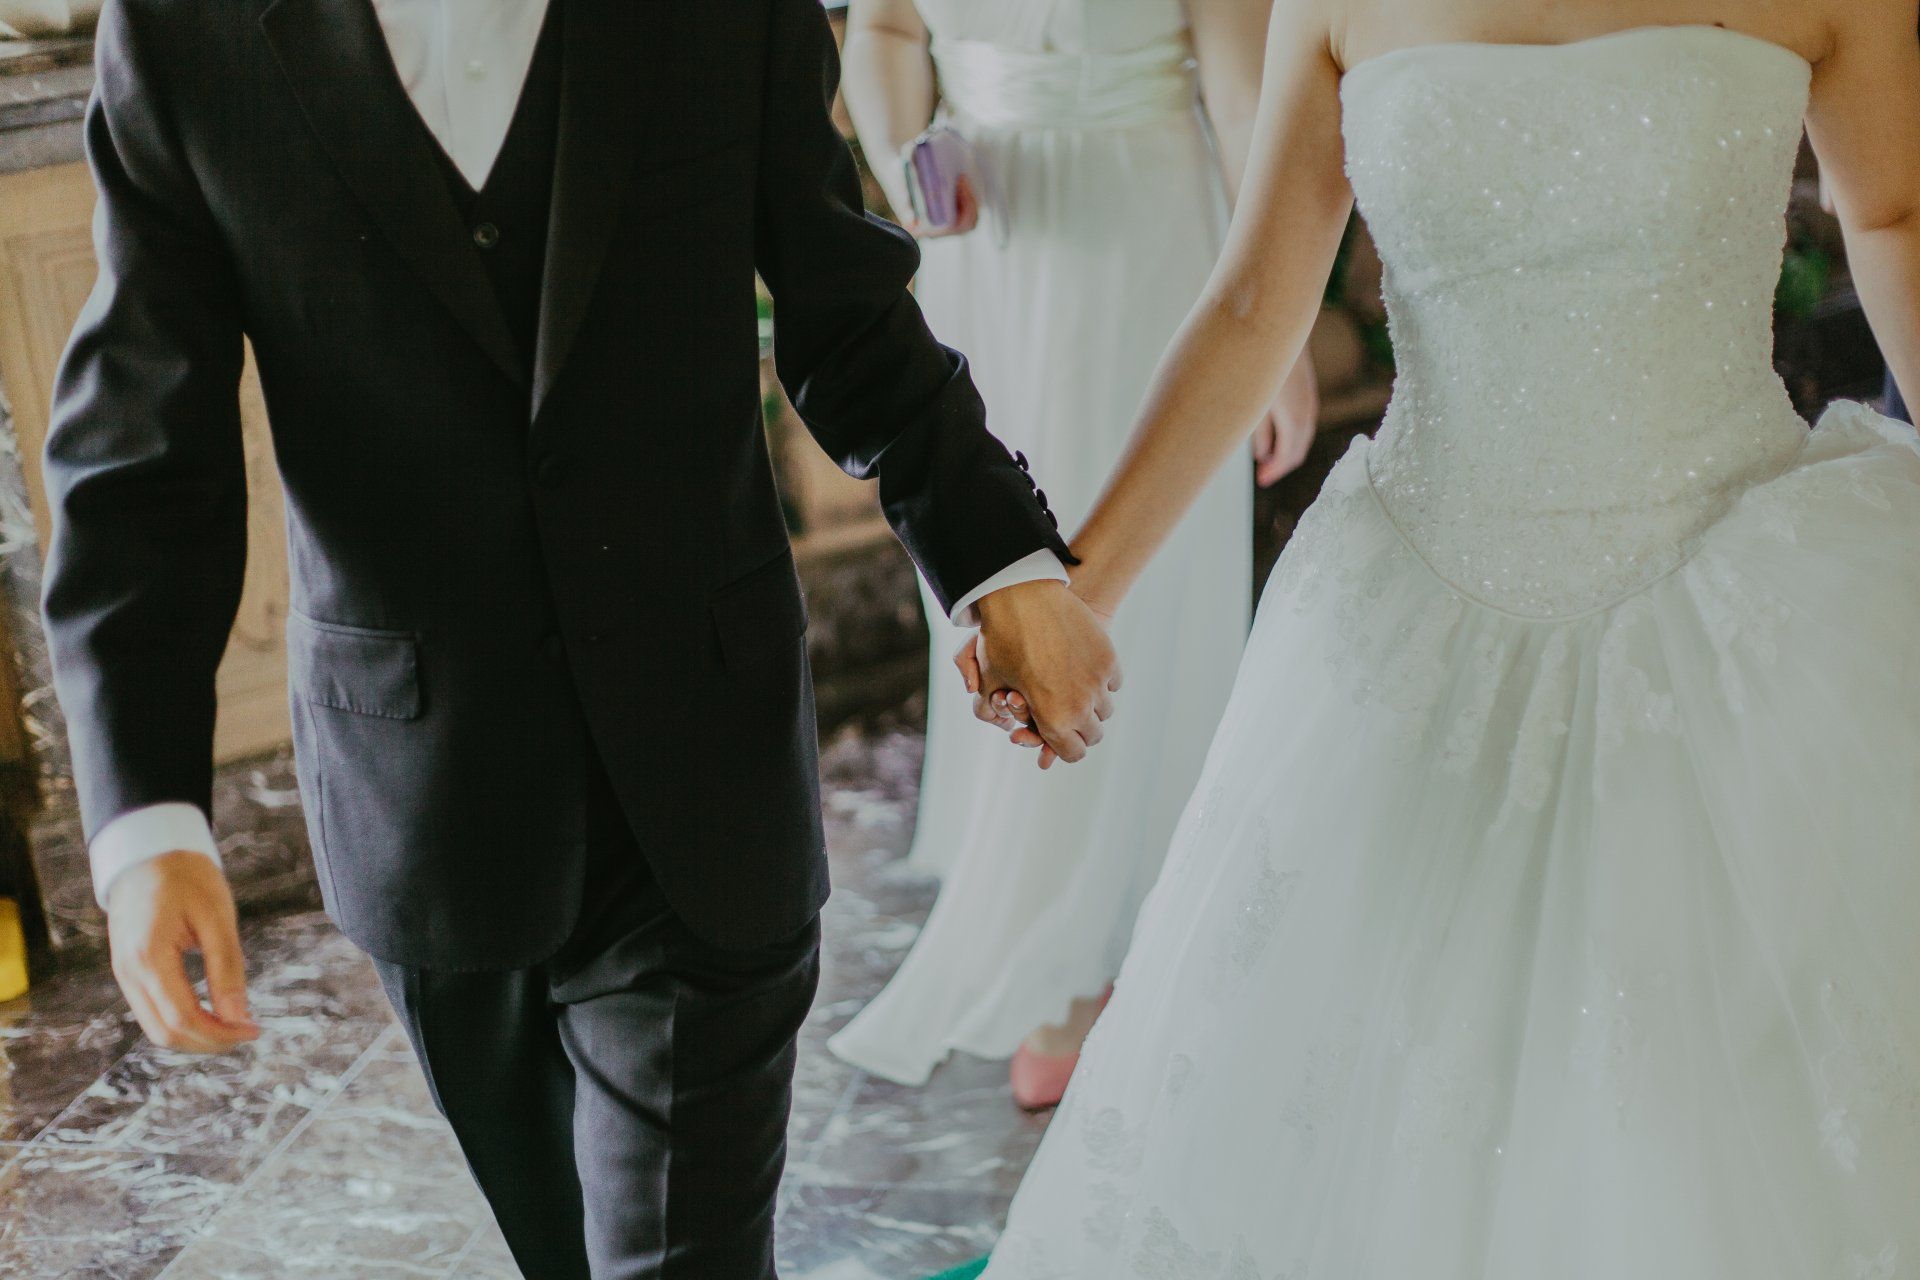 the bride and groom are holding hands during their wedding ceremony